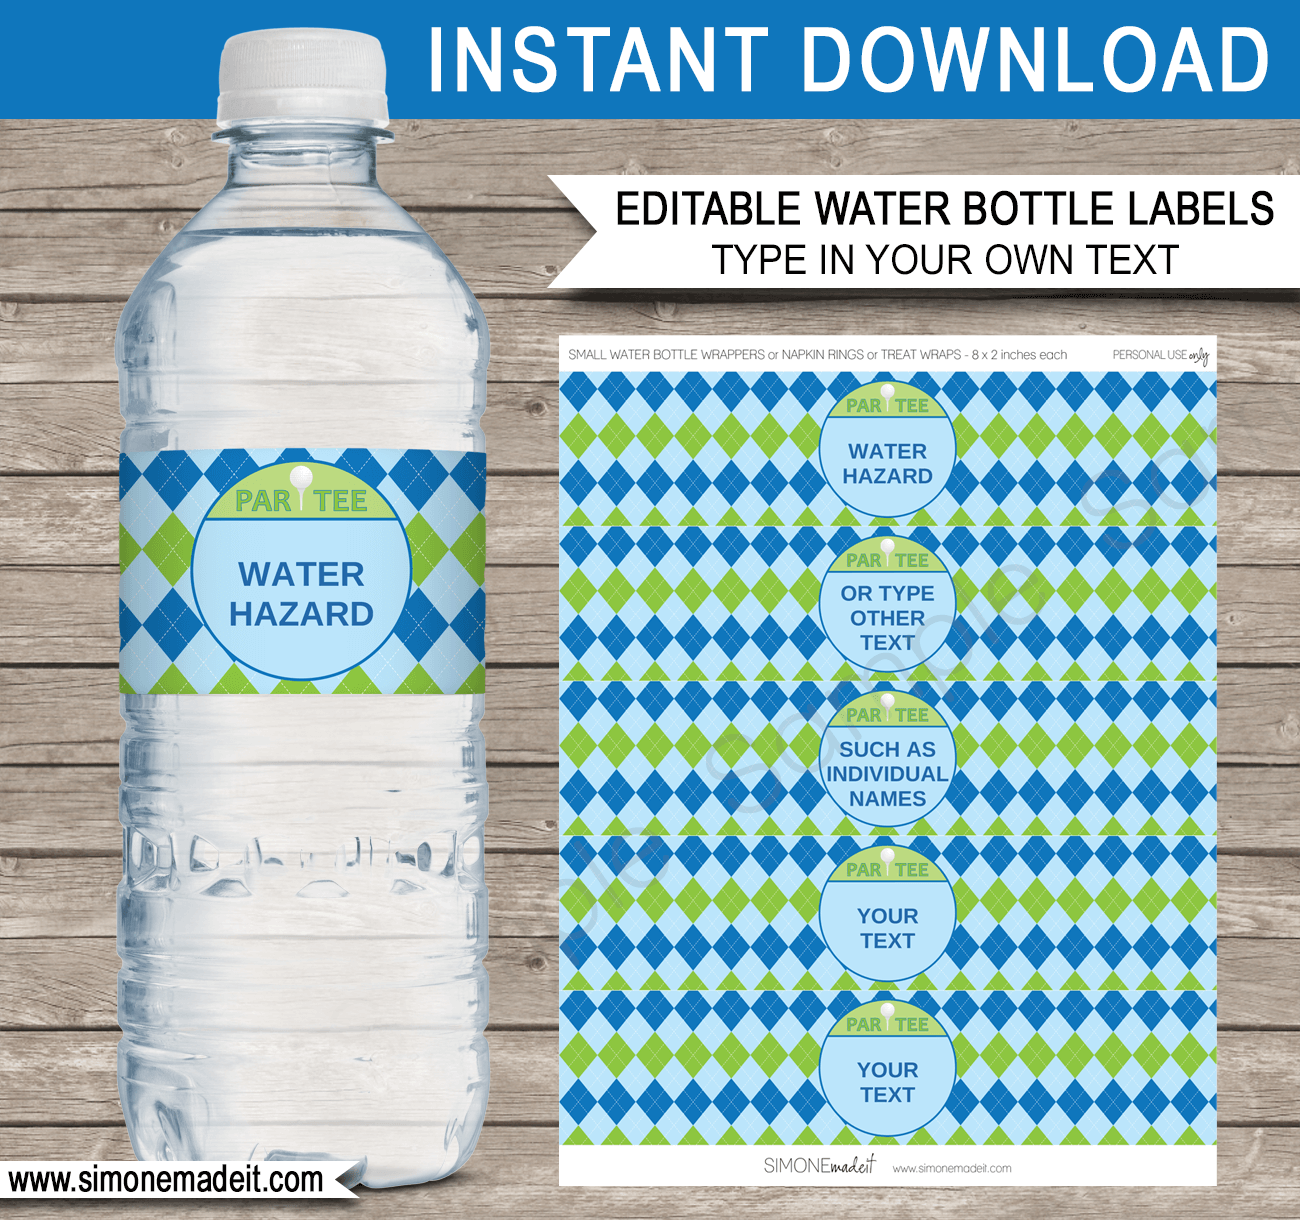 Printable Golf Party Water Bottle Labels Template | Retirement Party, Birthday Party Decorations | DIY Editable Text | $3.00 INSTANT DOWNLOAD via SIMONEmadeit.com